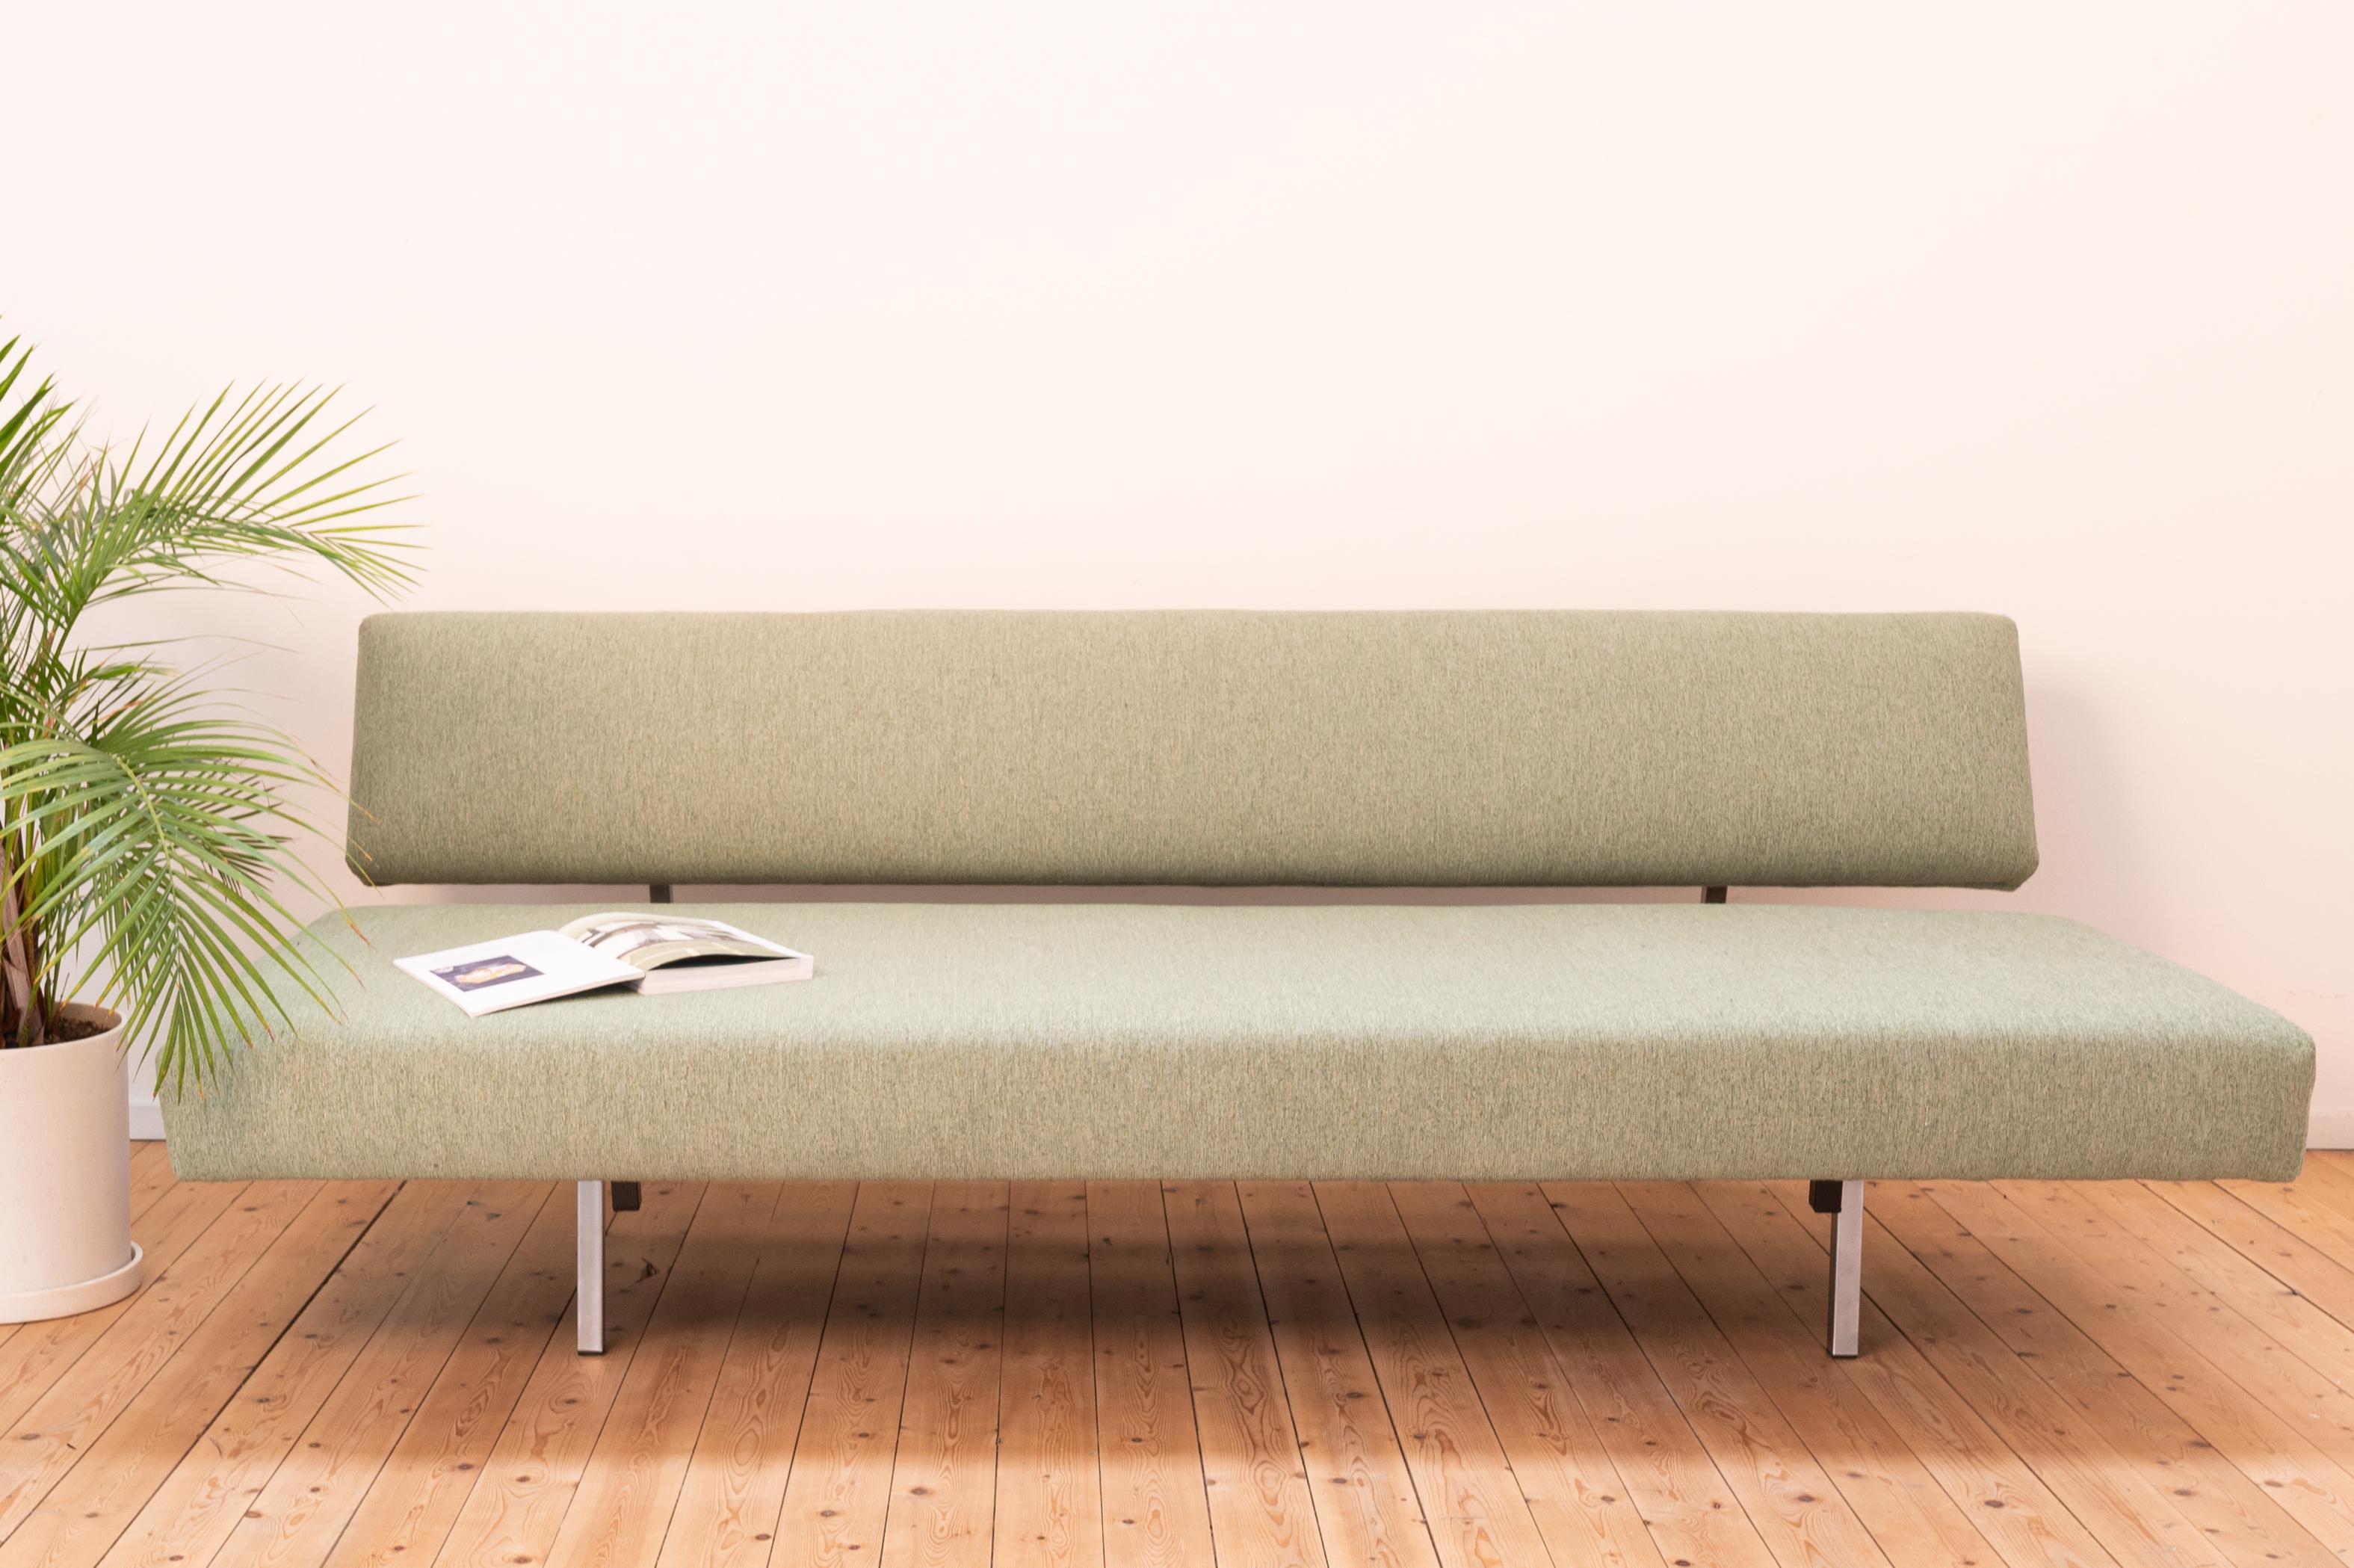 Martin Visser's iconic BR 02 sofa, for Spectrum. This Mid-Century Modern sleeper sofa has been refurbished by us and was given a new pale green qualitative upholstery. The seat and back are supported by a silver metal frame with a shifting mechanism